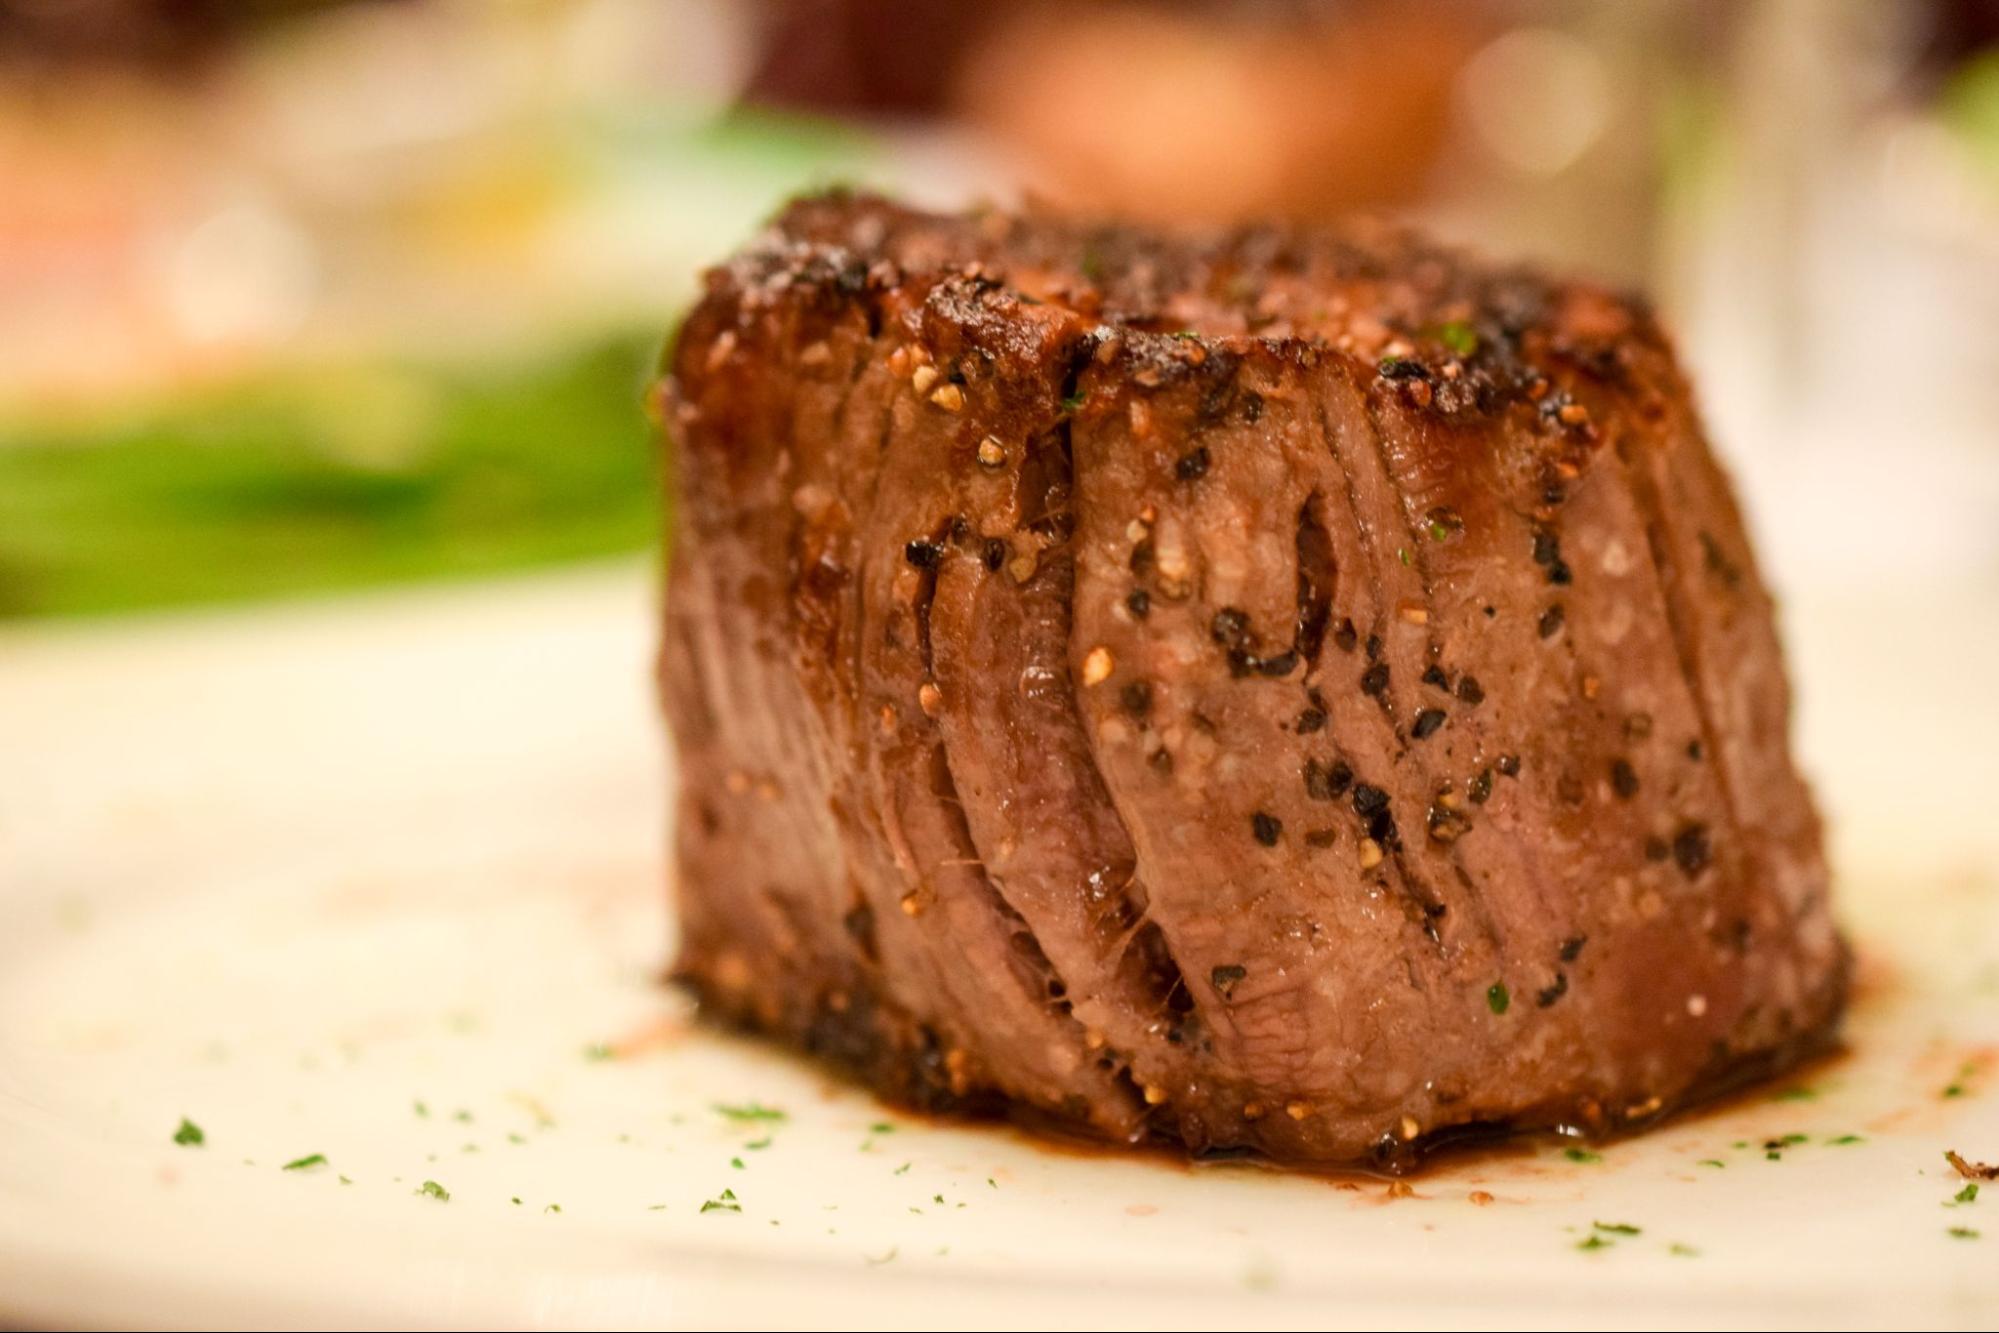 A tender filet mignon made by the Christner’s chefs.